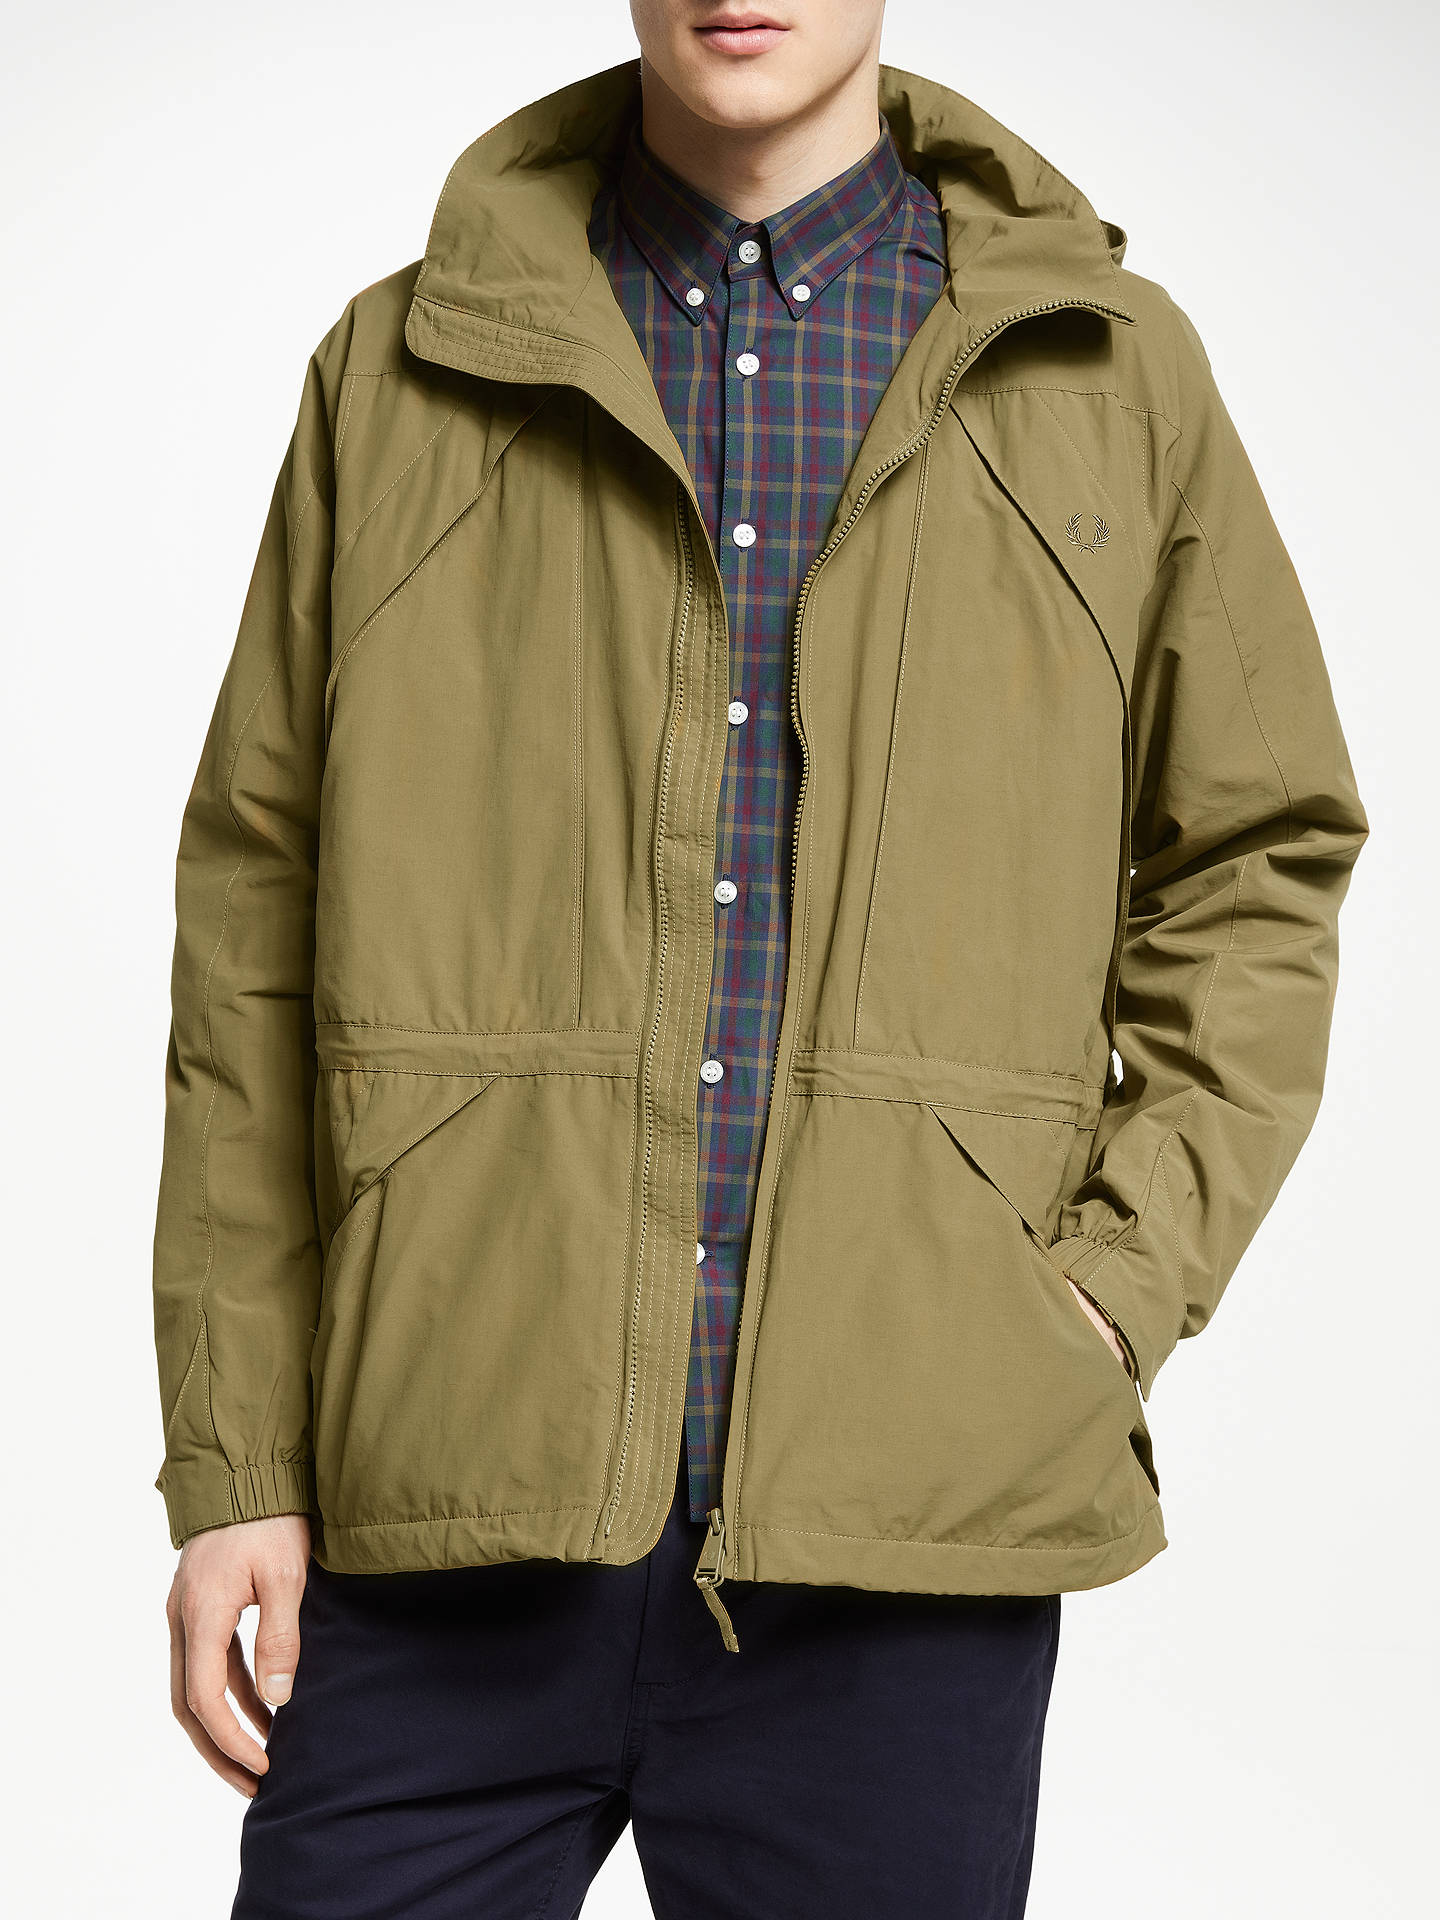 Fred Perry Offshore Jacket, Coyote at John Lewis & Partners